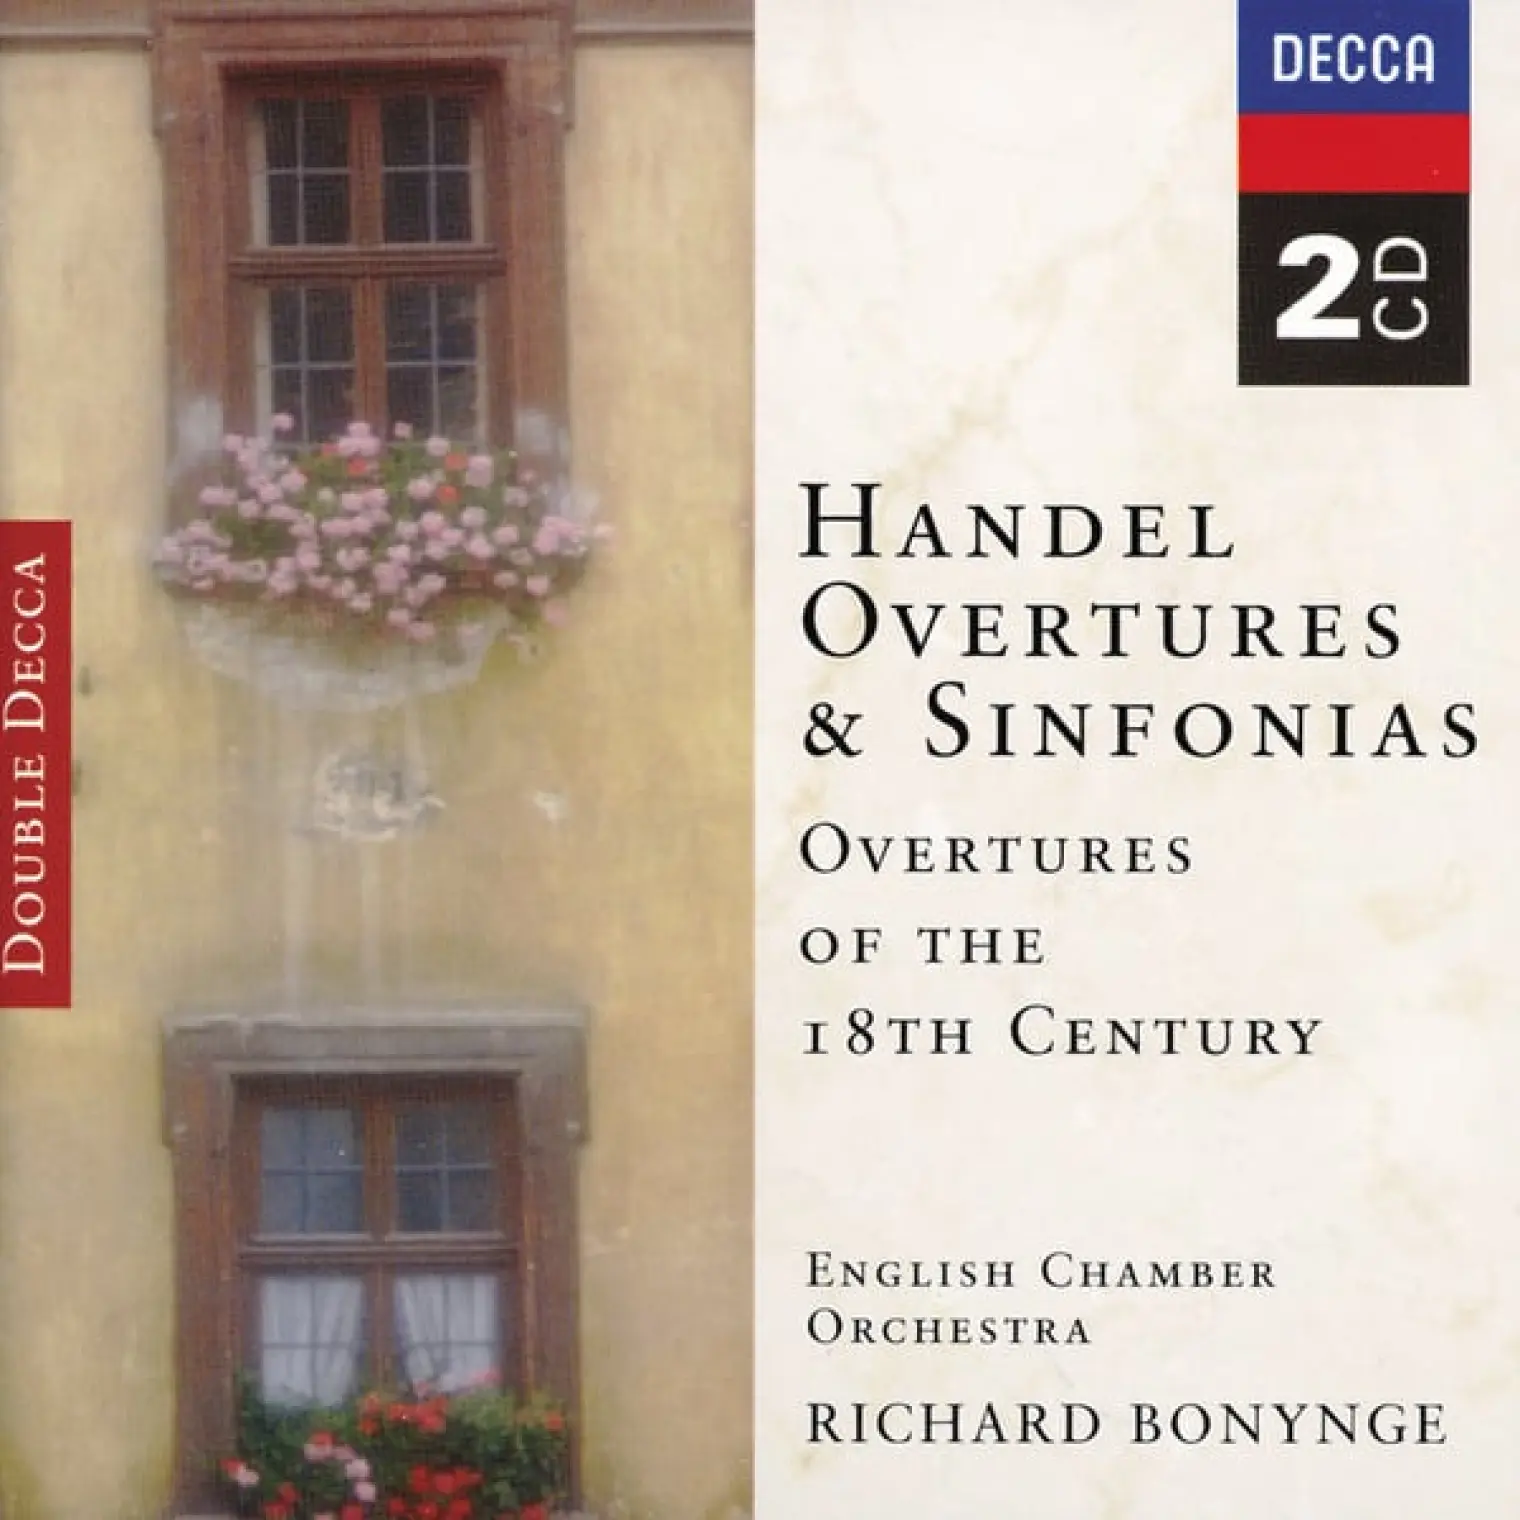 Handel, etc.: Overtures of the 18th Century -  English Chamber Orchestra 